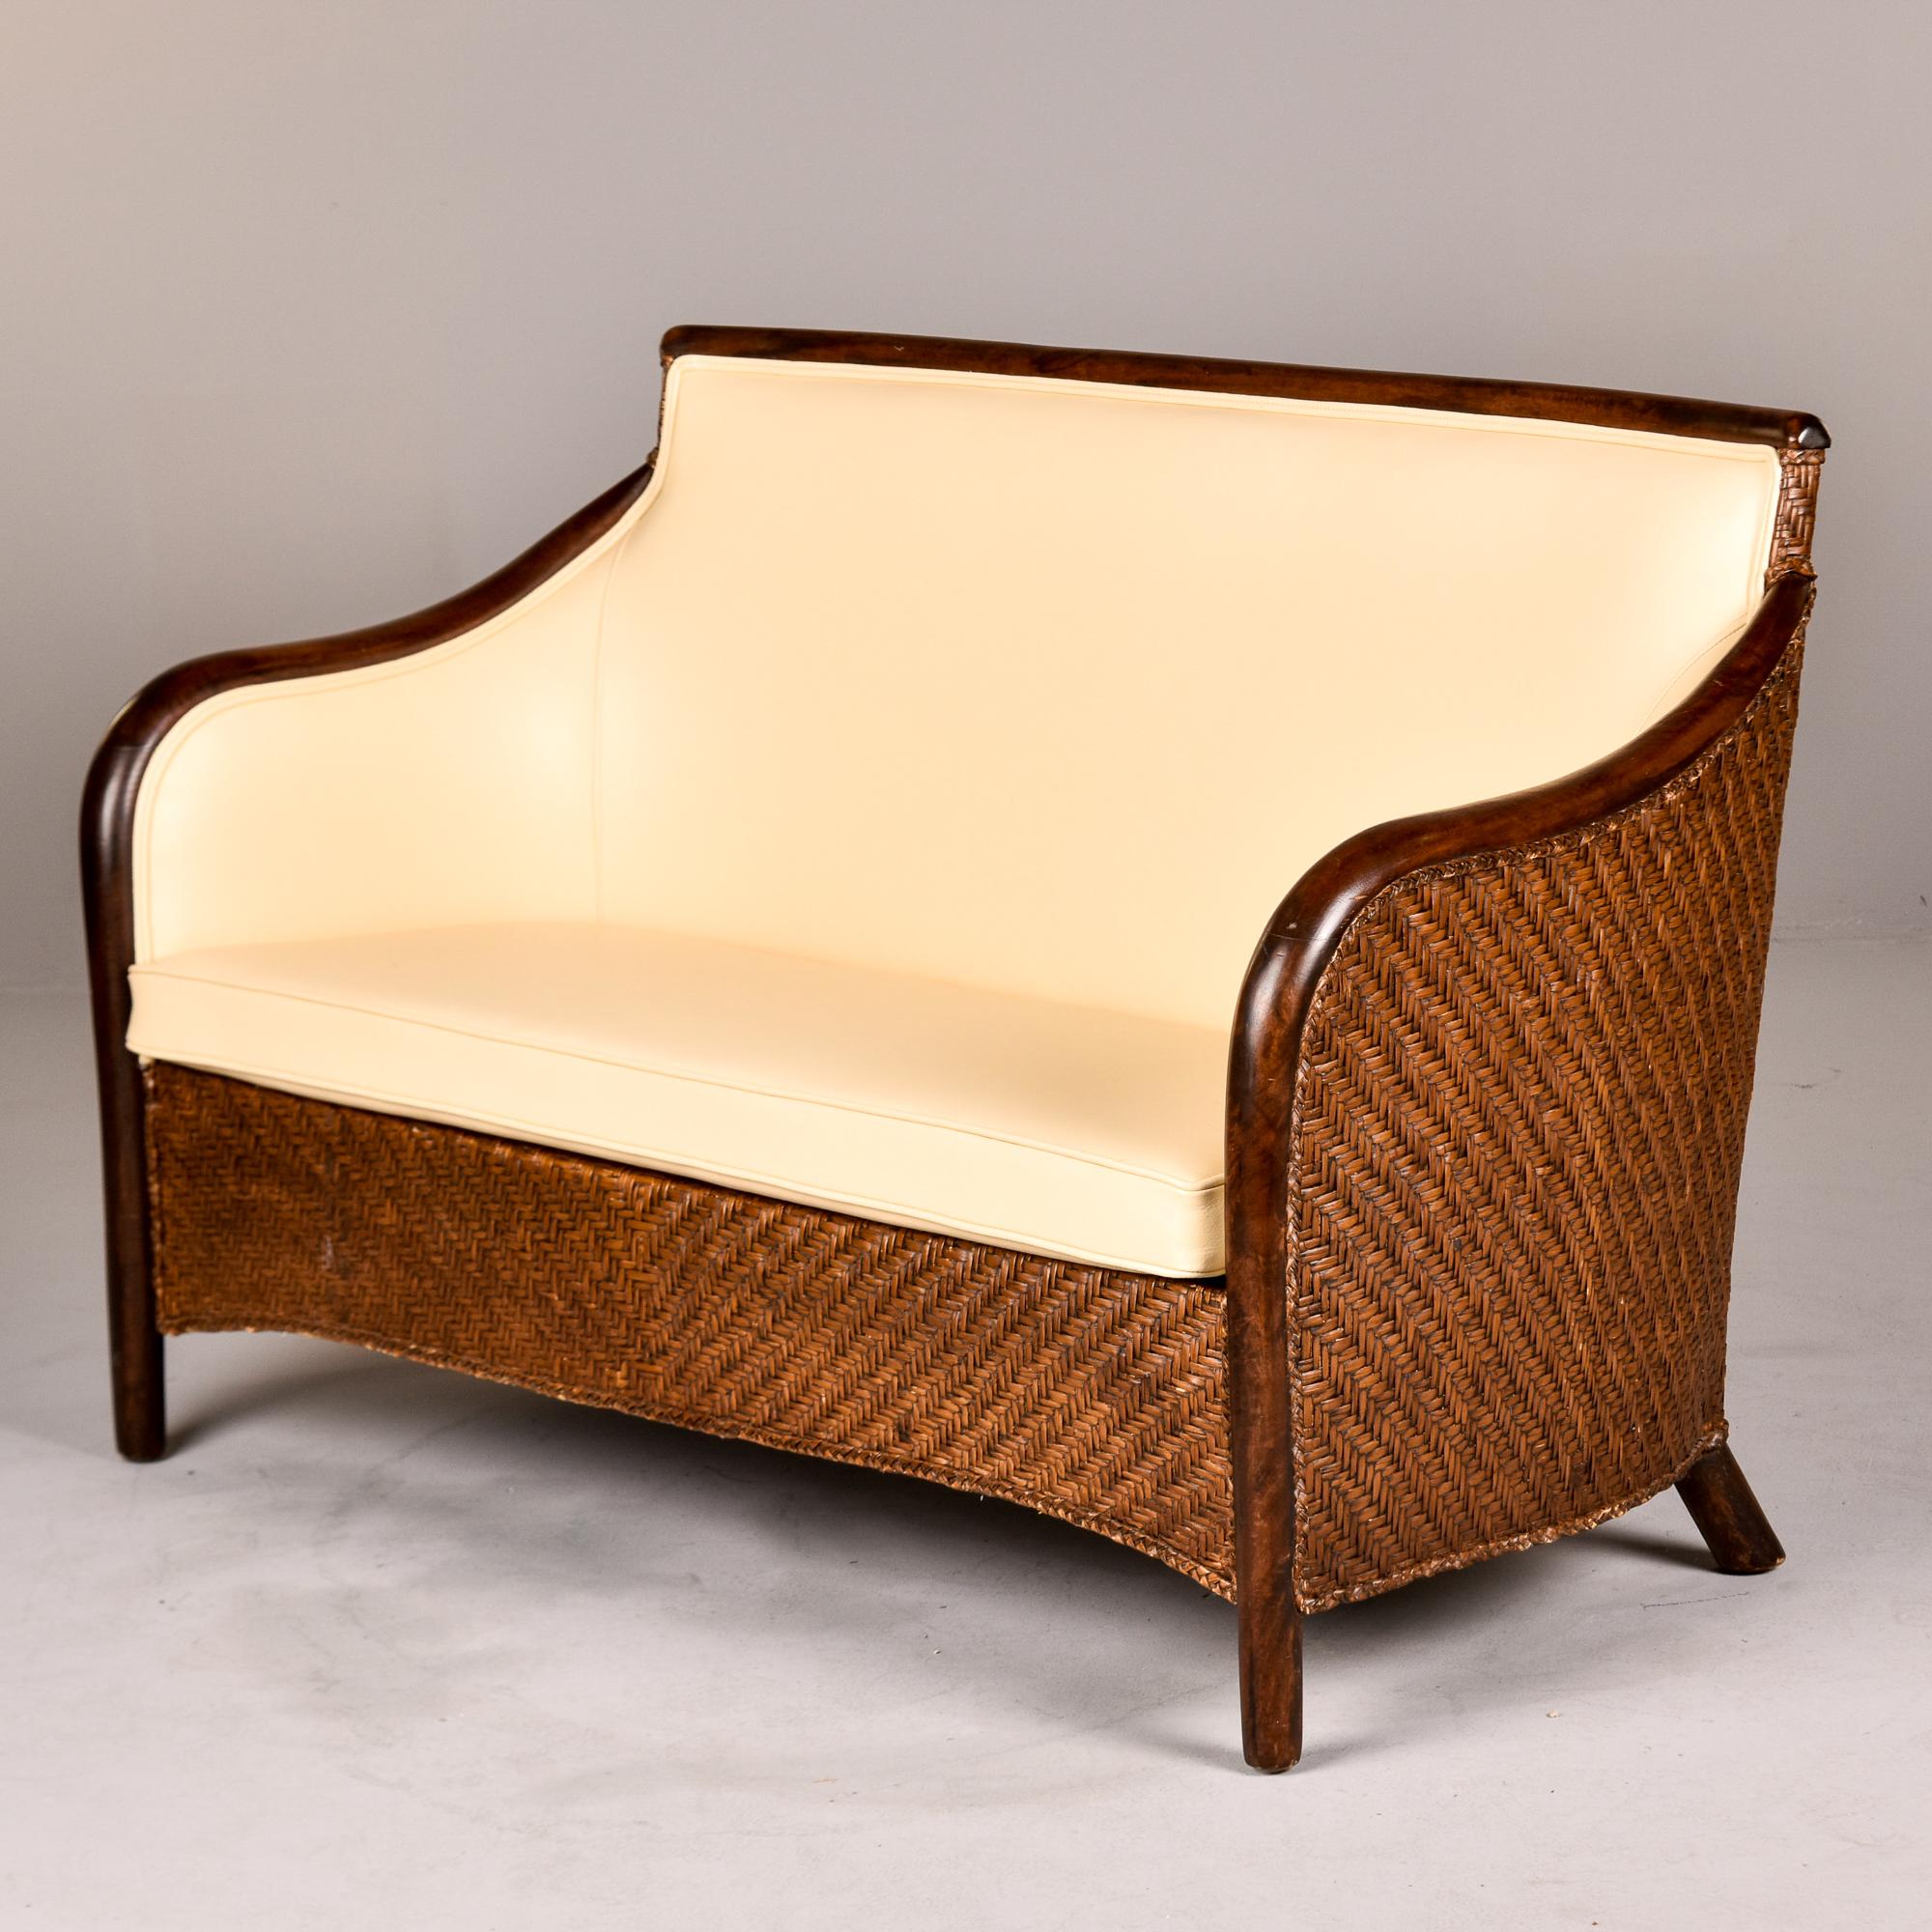 Found in Italy, this wicker and bentwood frame sofa dates from the 1940s. We had it reupholstered in a creamy, ivory colored leather. Unknown maker. Coordinating pair of chairs in same style / upholstery available at the time of this posting in a